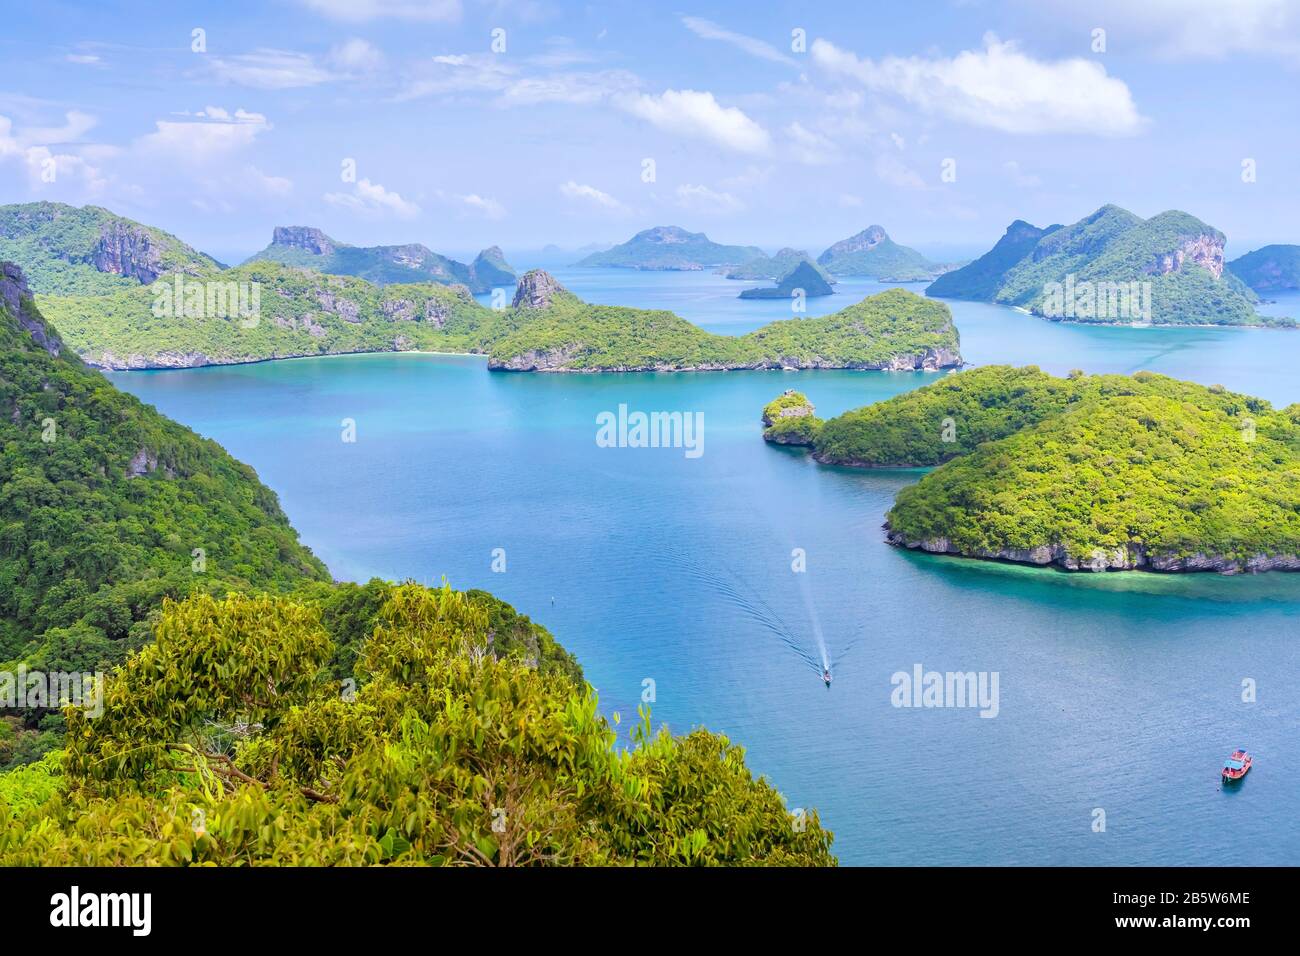 Beautiful scenery at view point of Ang Thong National Marine Park near Koh Samui in Gulf of Thailand, Surat Thani Province, Thailand. Stock Photo